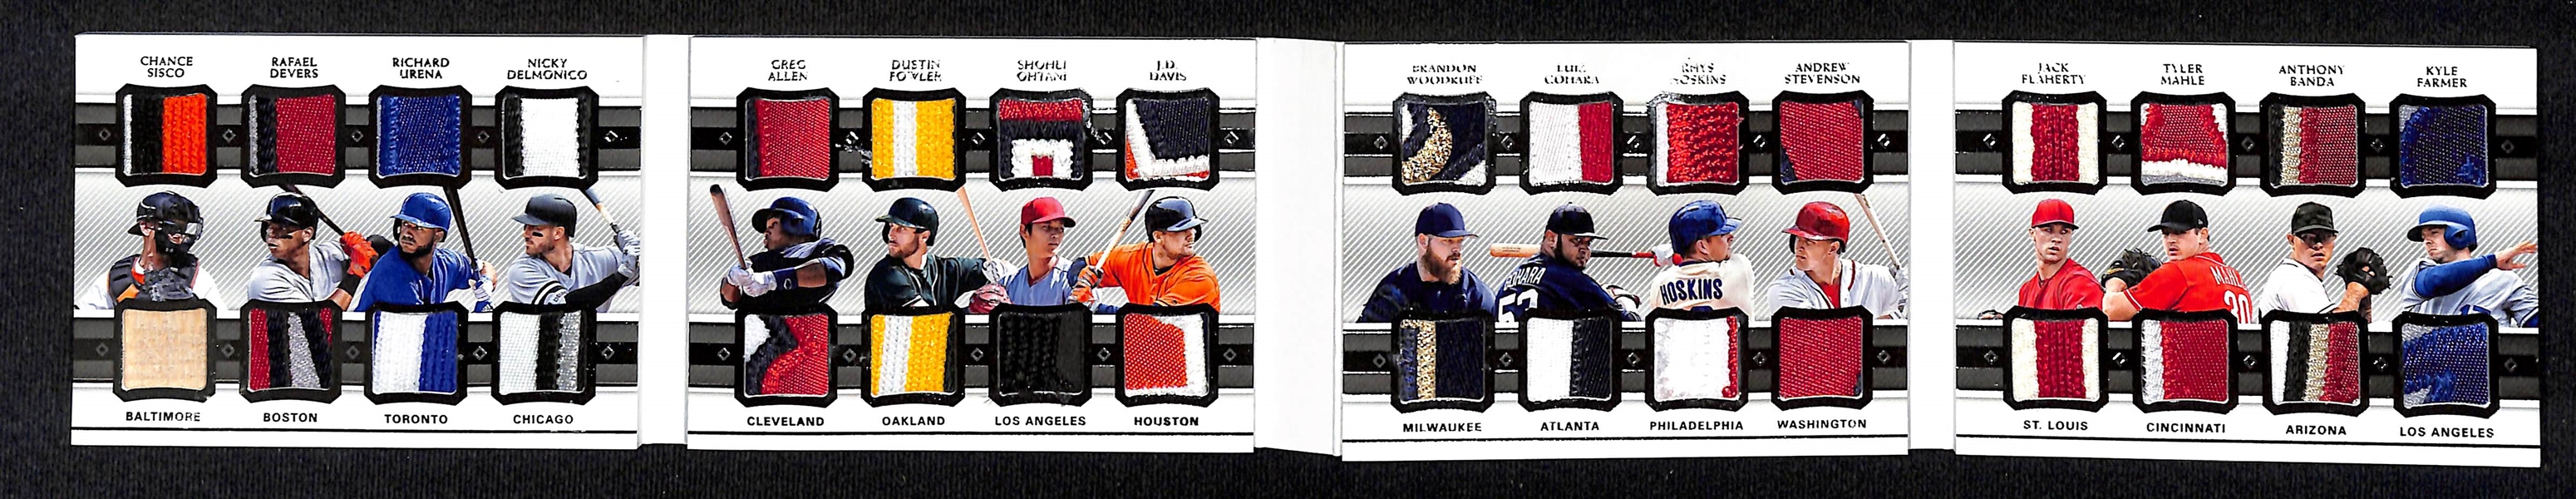 2018 National Treasures Baseball 16 Player Dual Game Used Materials Card w. Ohtani, Devers, Davis and Many More!